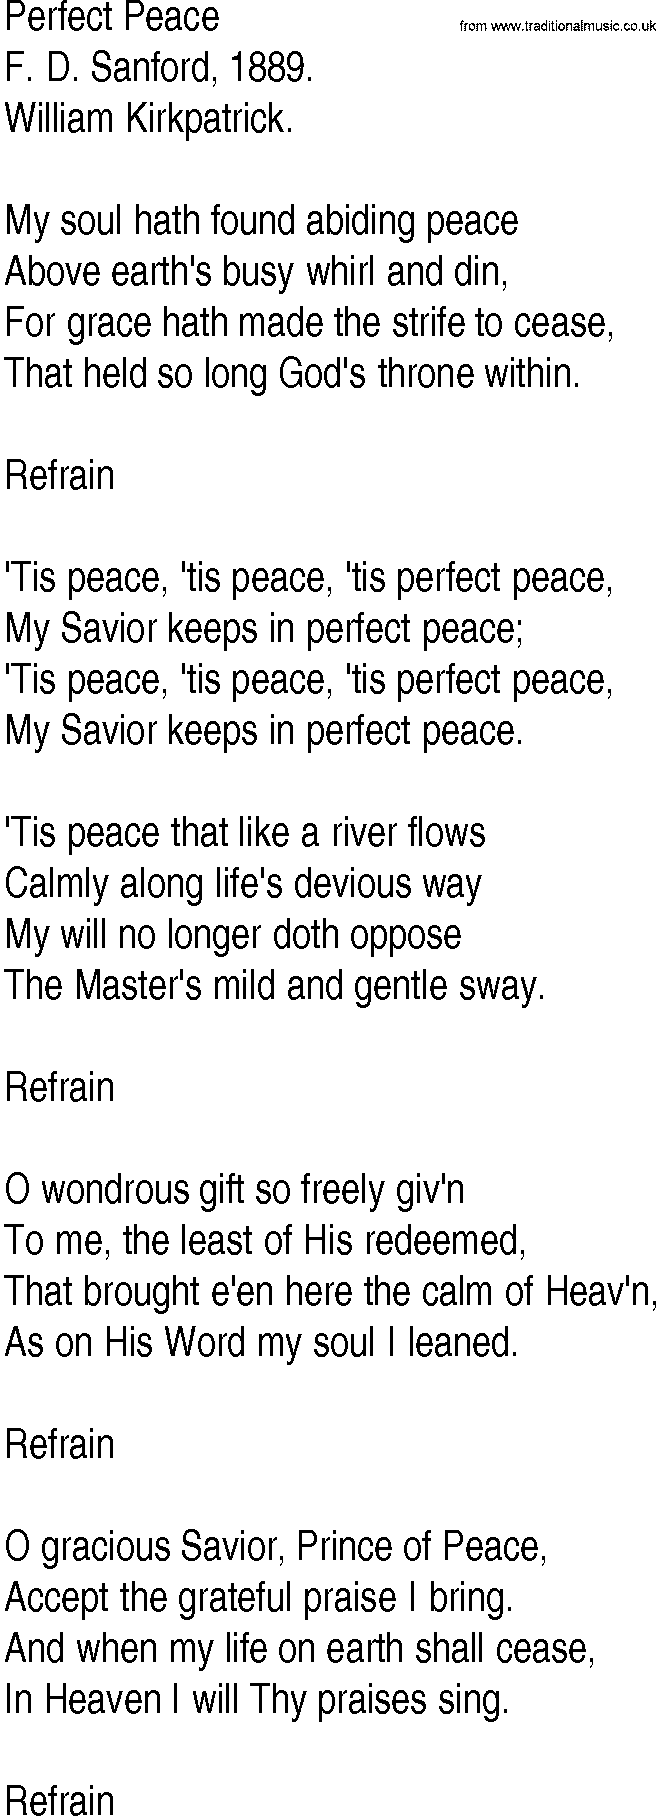 Hymn and Gospel Song: Perfect Peace by F D Sanford lyrics